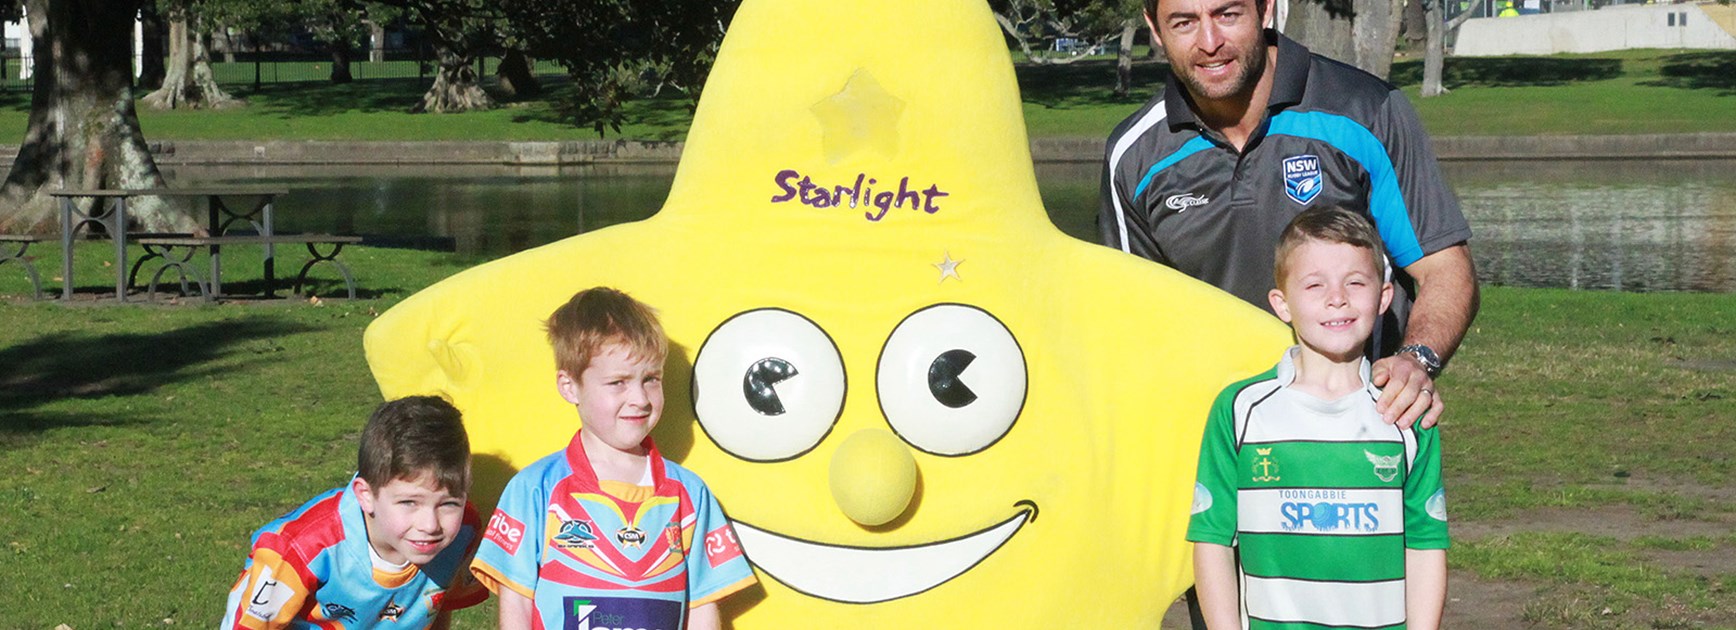 NSWRL ambassador Anthony Minichiello and more than 40,000 Junior Rugby League players will kick-off the "NSWRL Wishleagues" for the Starlight Foundation.